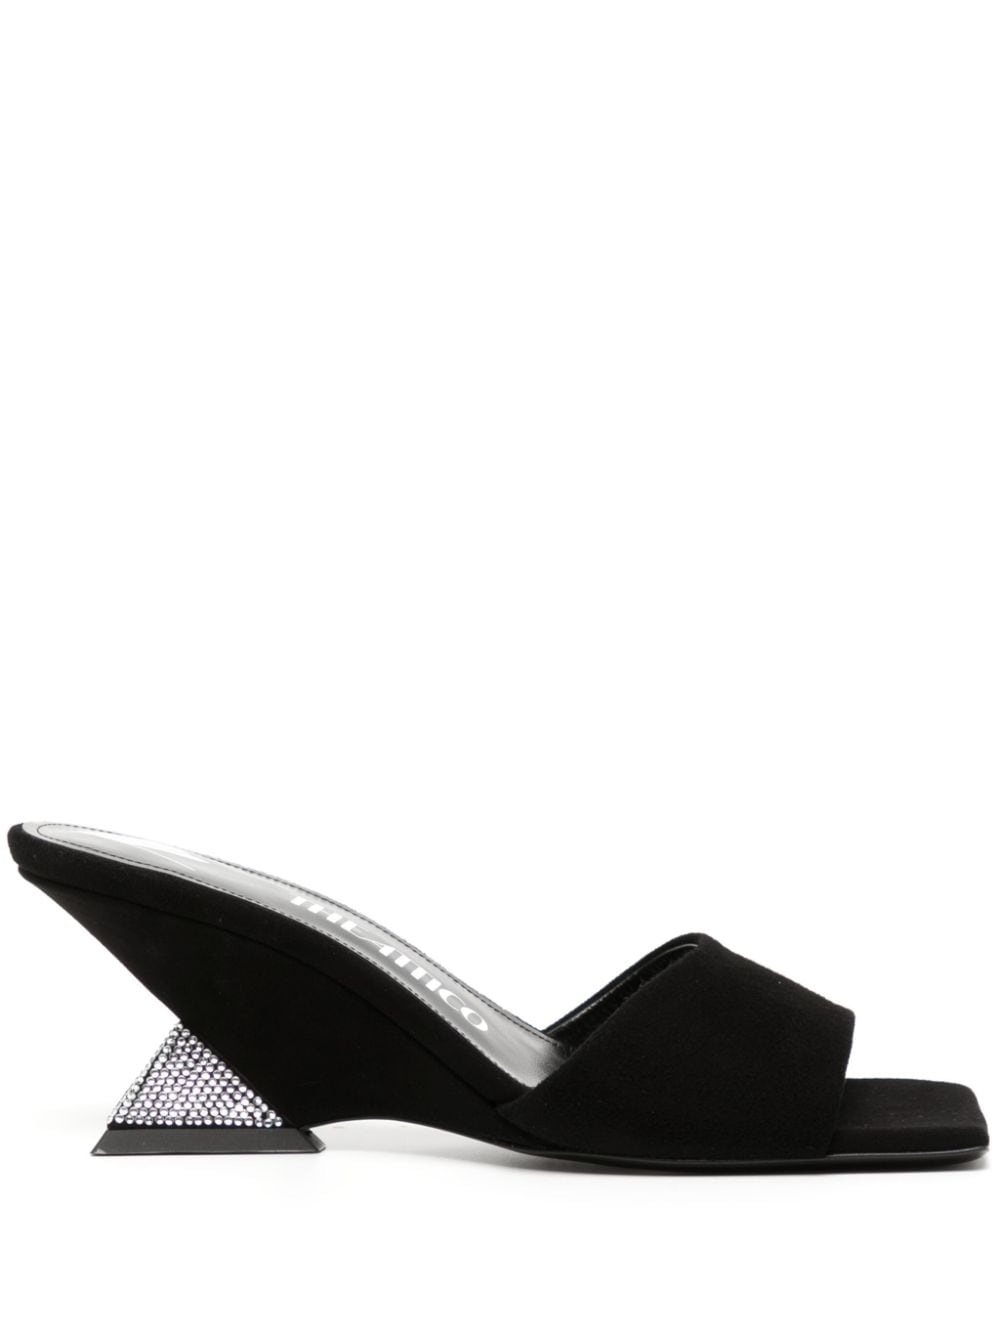 Cheope 60mm wedge mules - 1